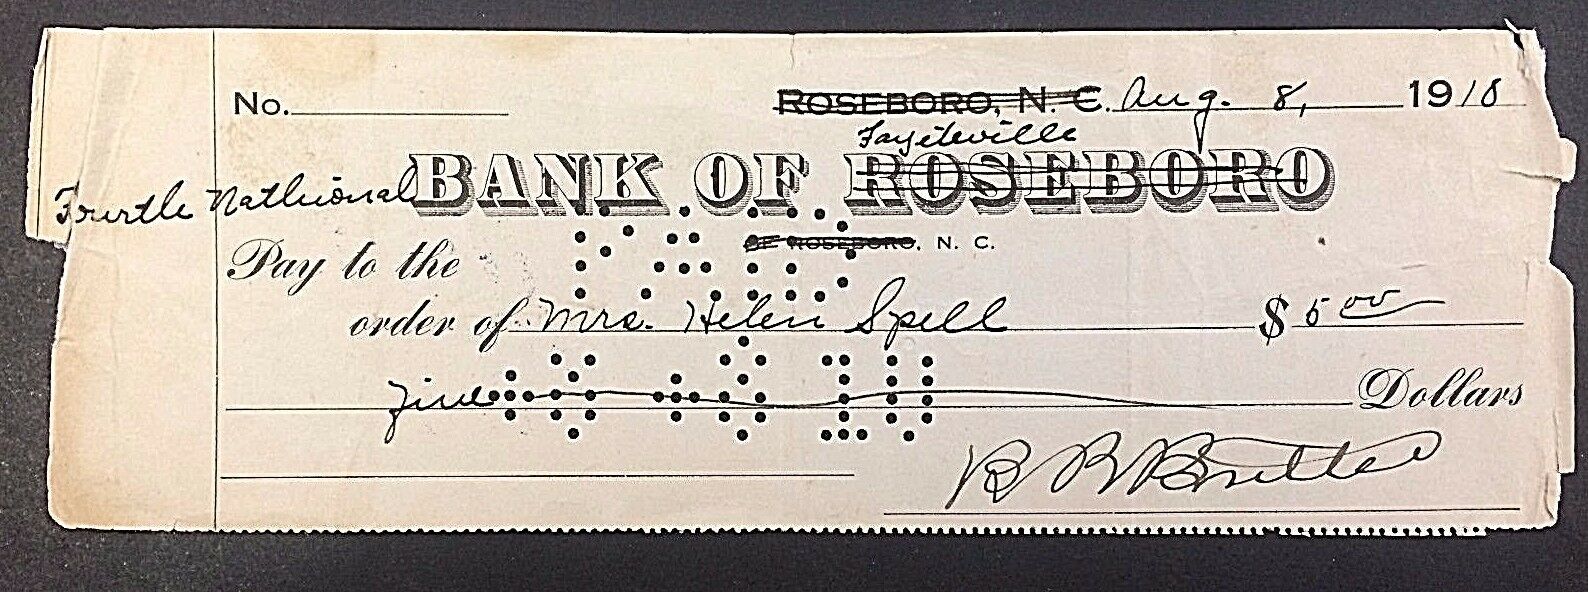 BANK of ROSEBORO CROSSED OUT into FOURTH NATIONAL BANK of FAYETVILLE 1910 CHECK